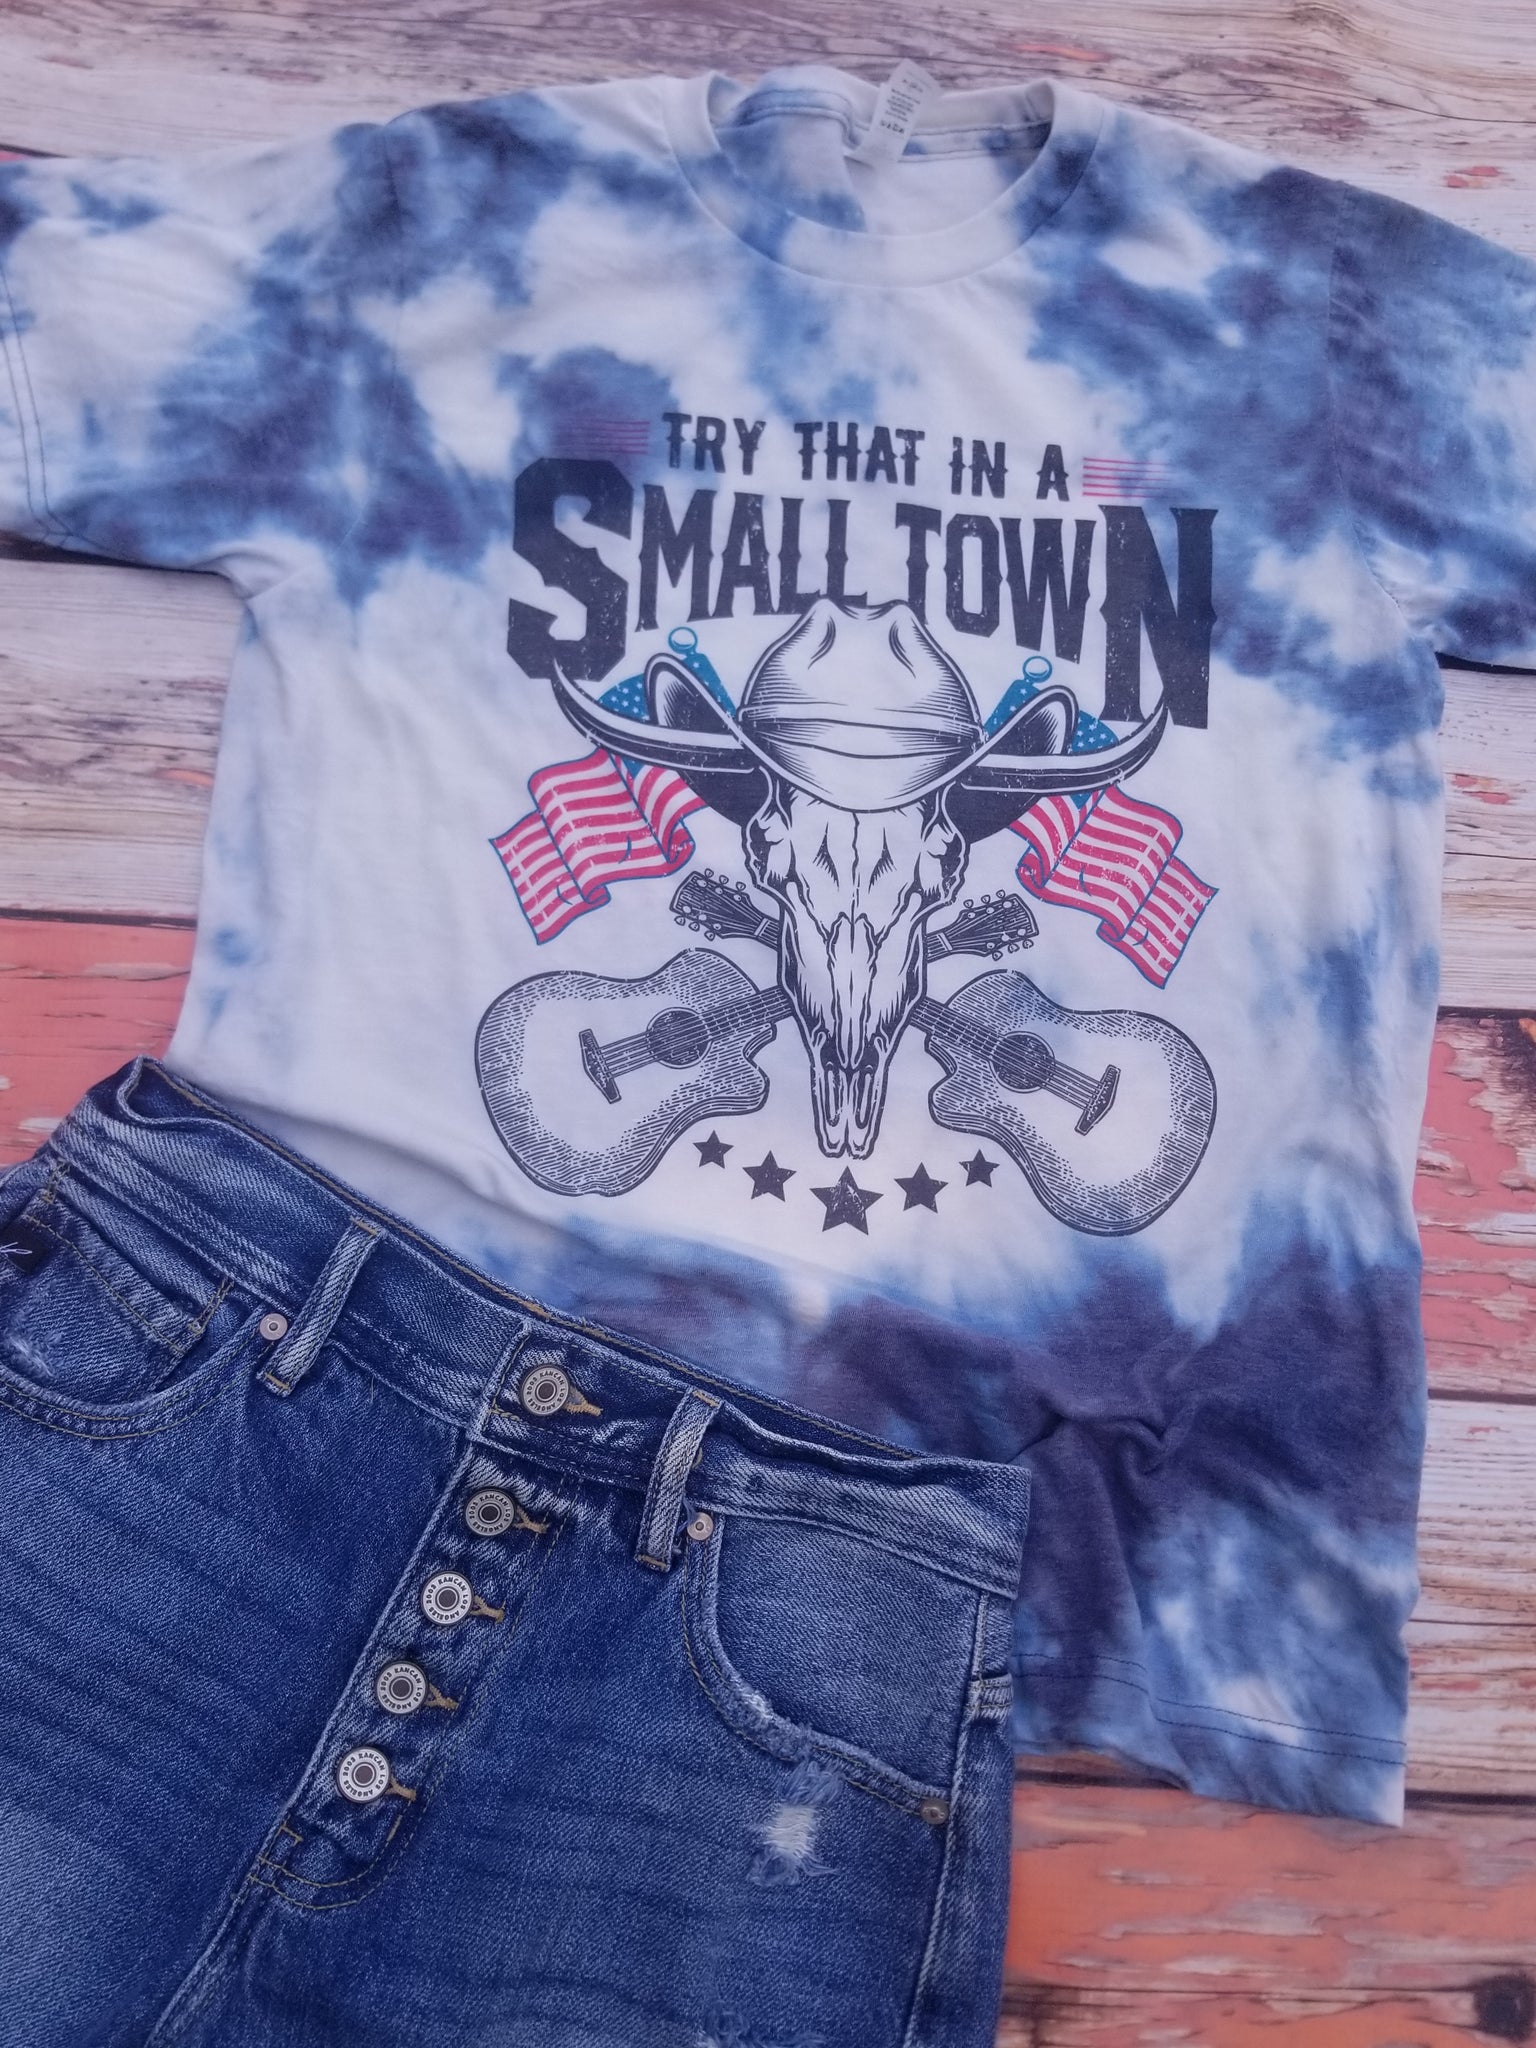 Small town bleached shirt